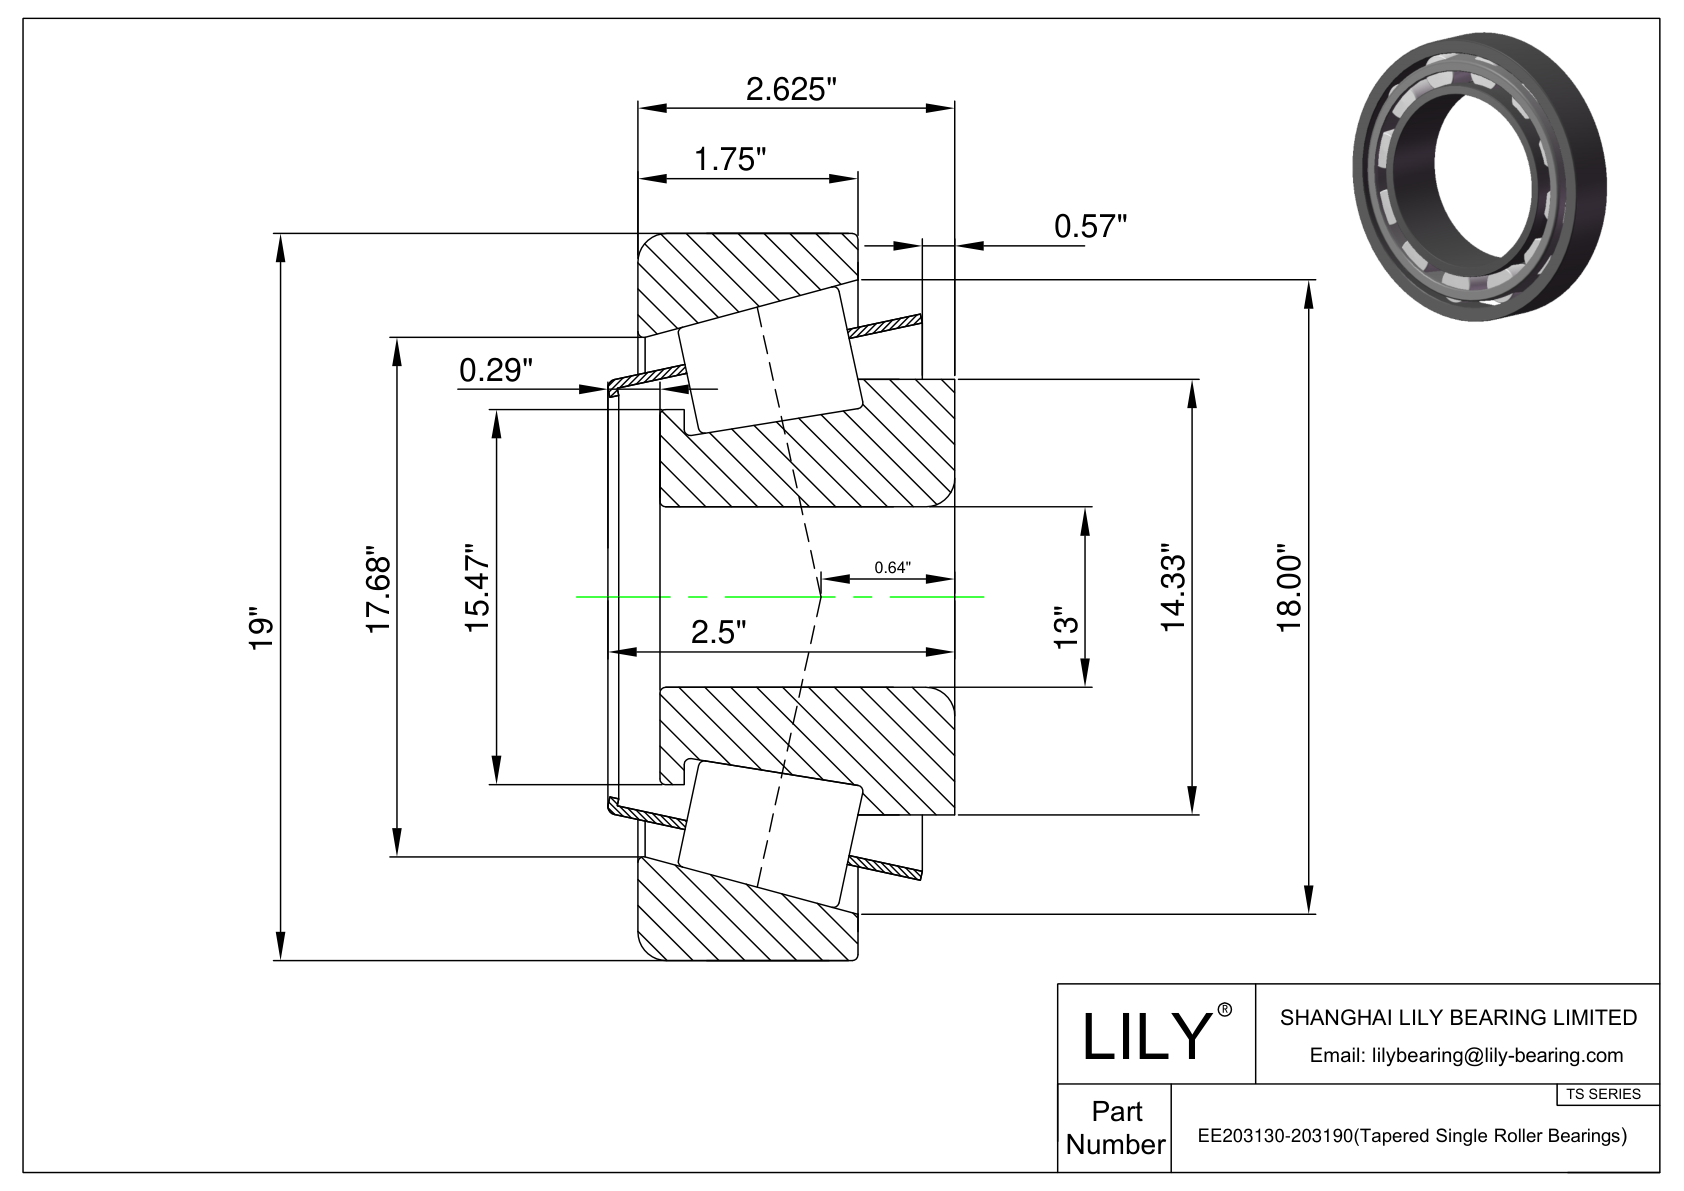 EE203130-203190 TS (Tapered Single Roller Bearings) (Imperial) cad drawing